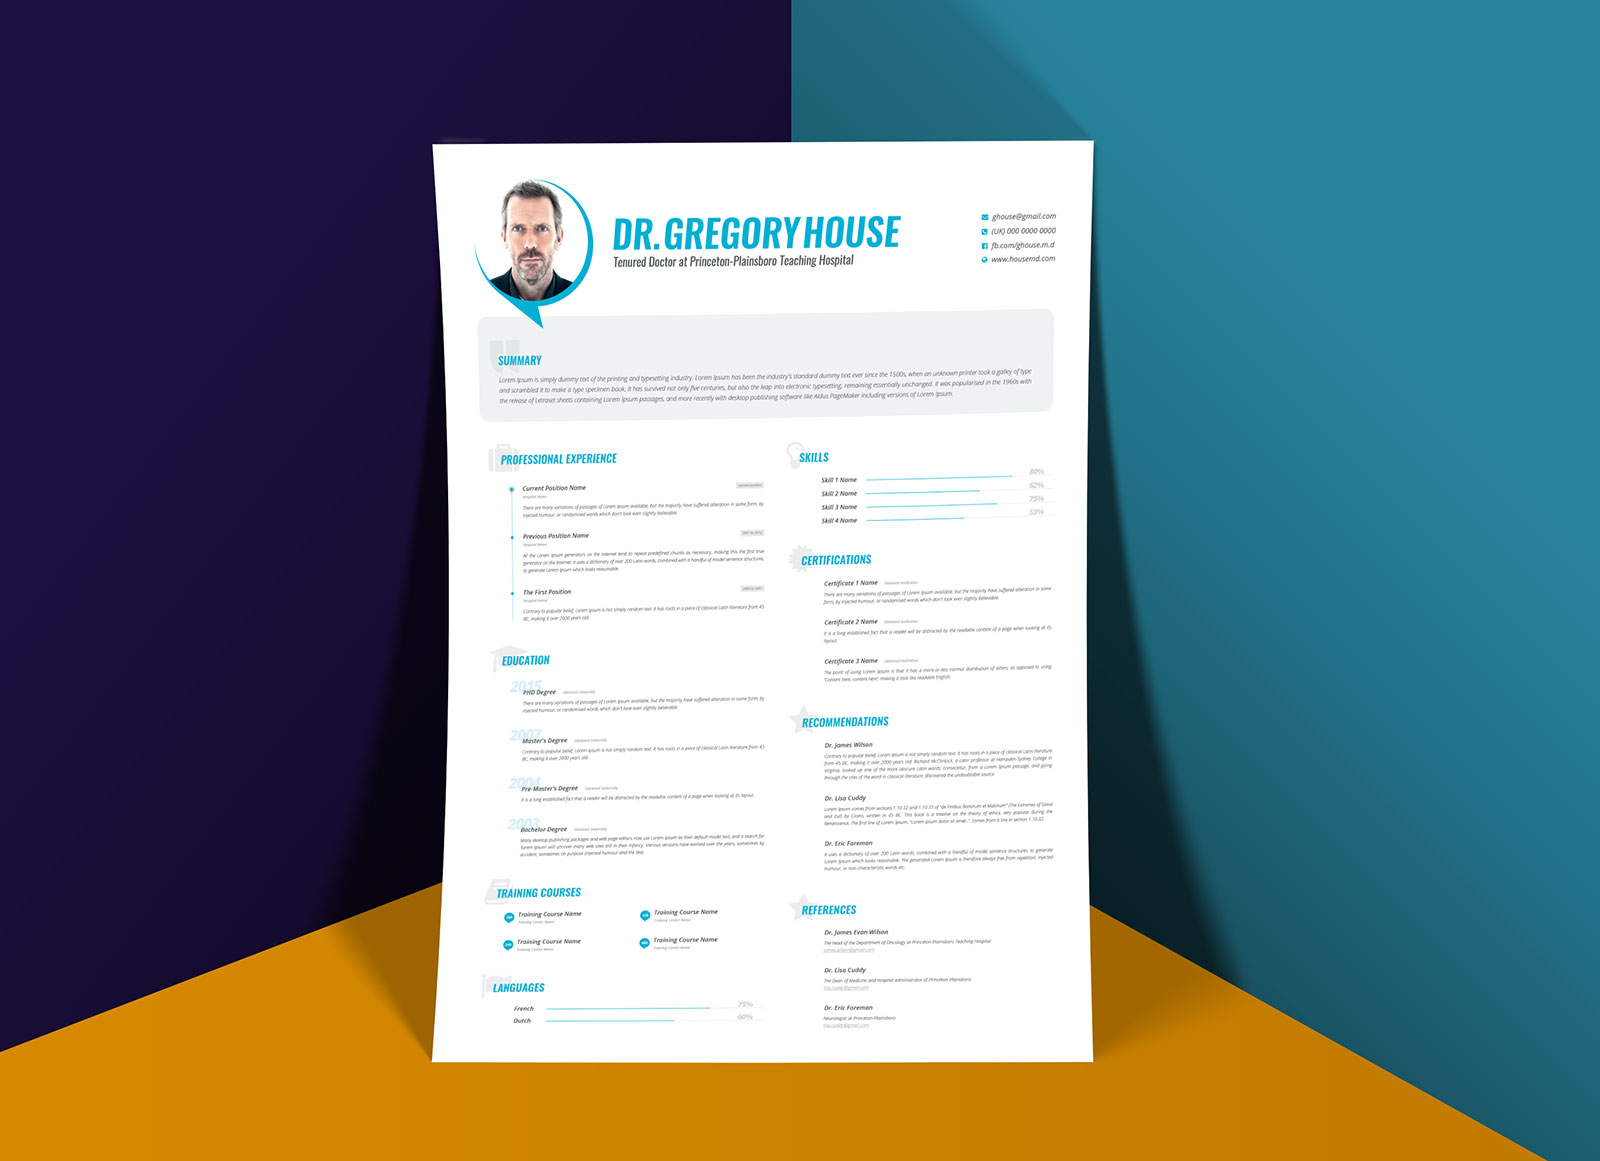 Free-PSD-Resume-Template-for-Doctors-and-Surgeons-2